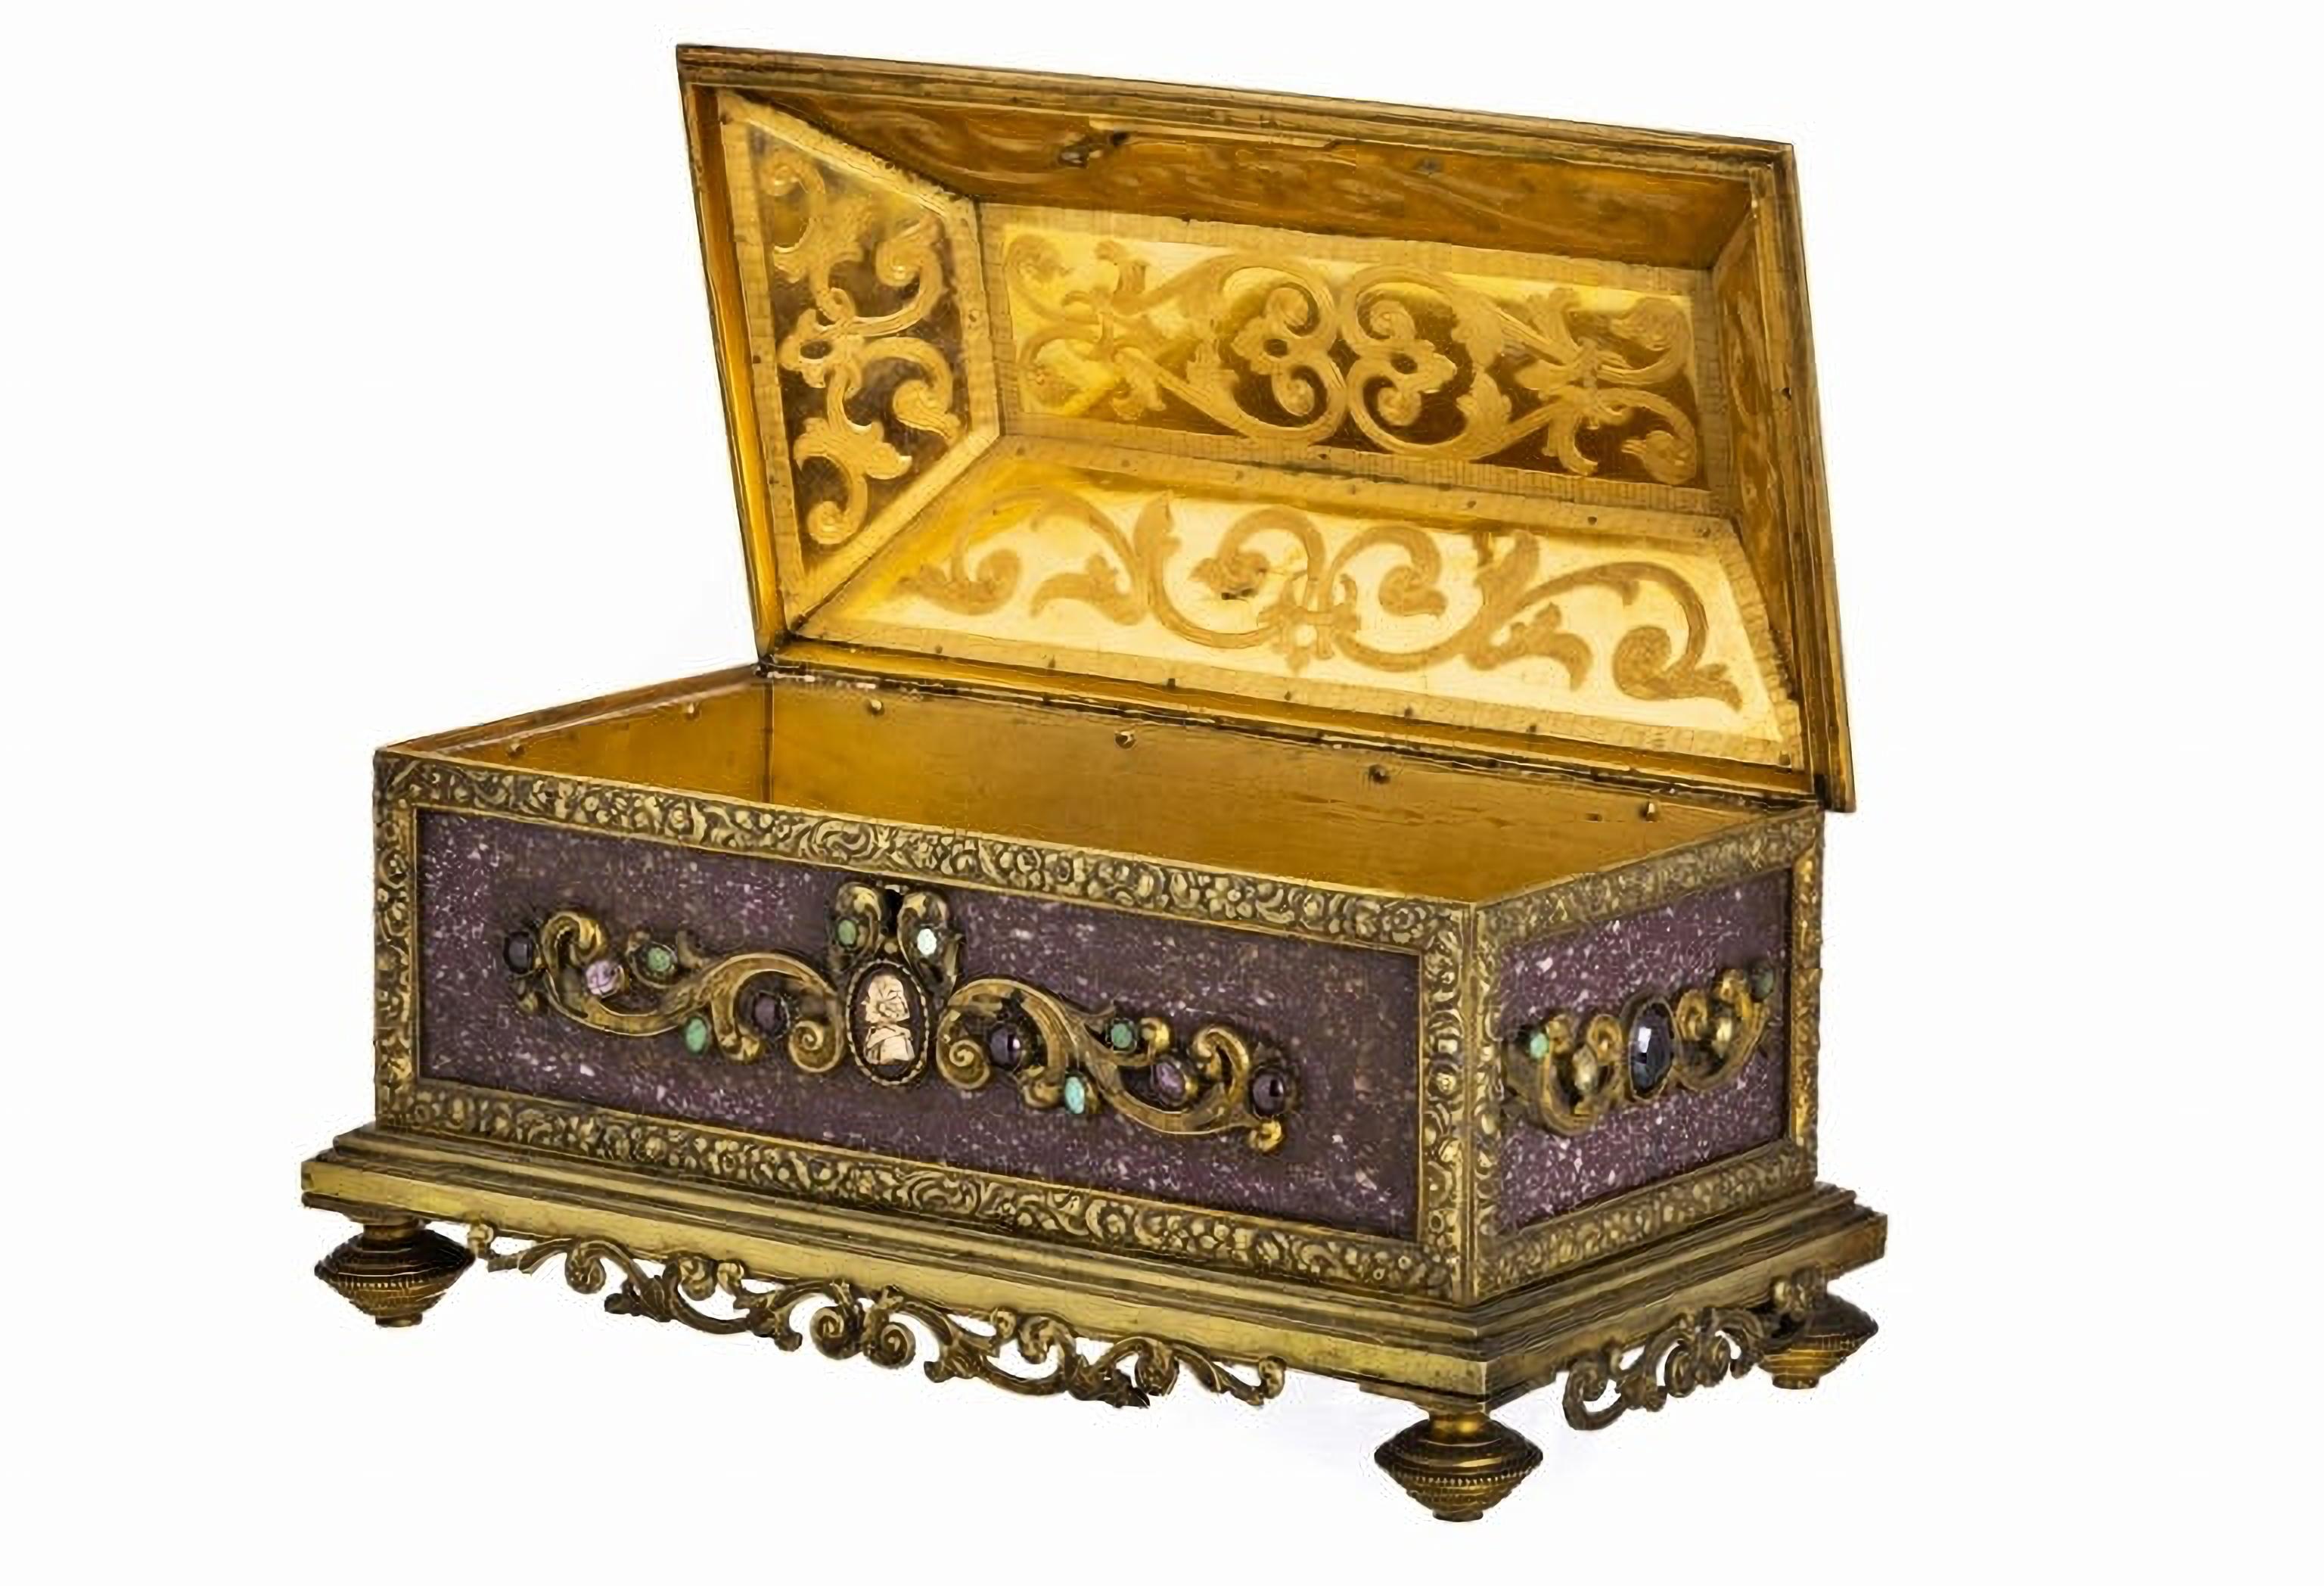 Hand-Crafted Important and Rare Italian Box Safe from the 17th Century '1647' For Sale